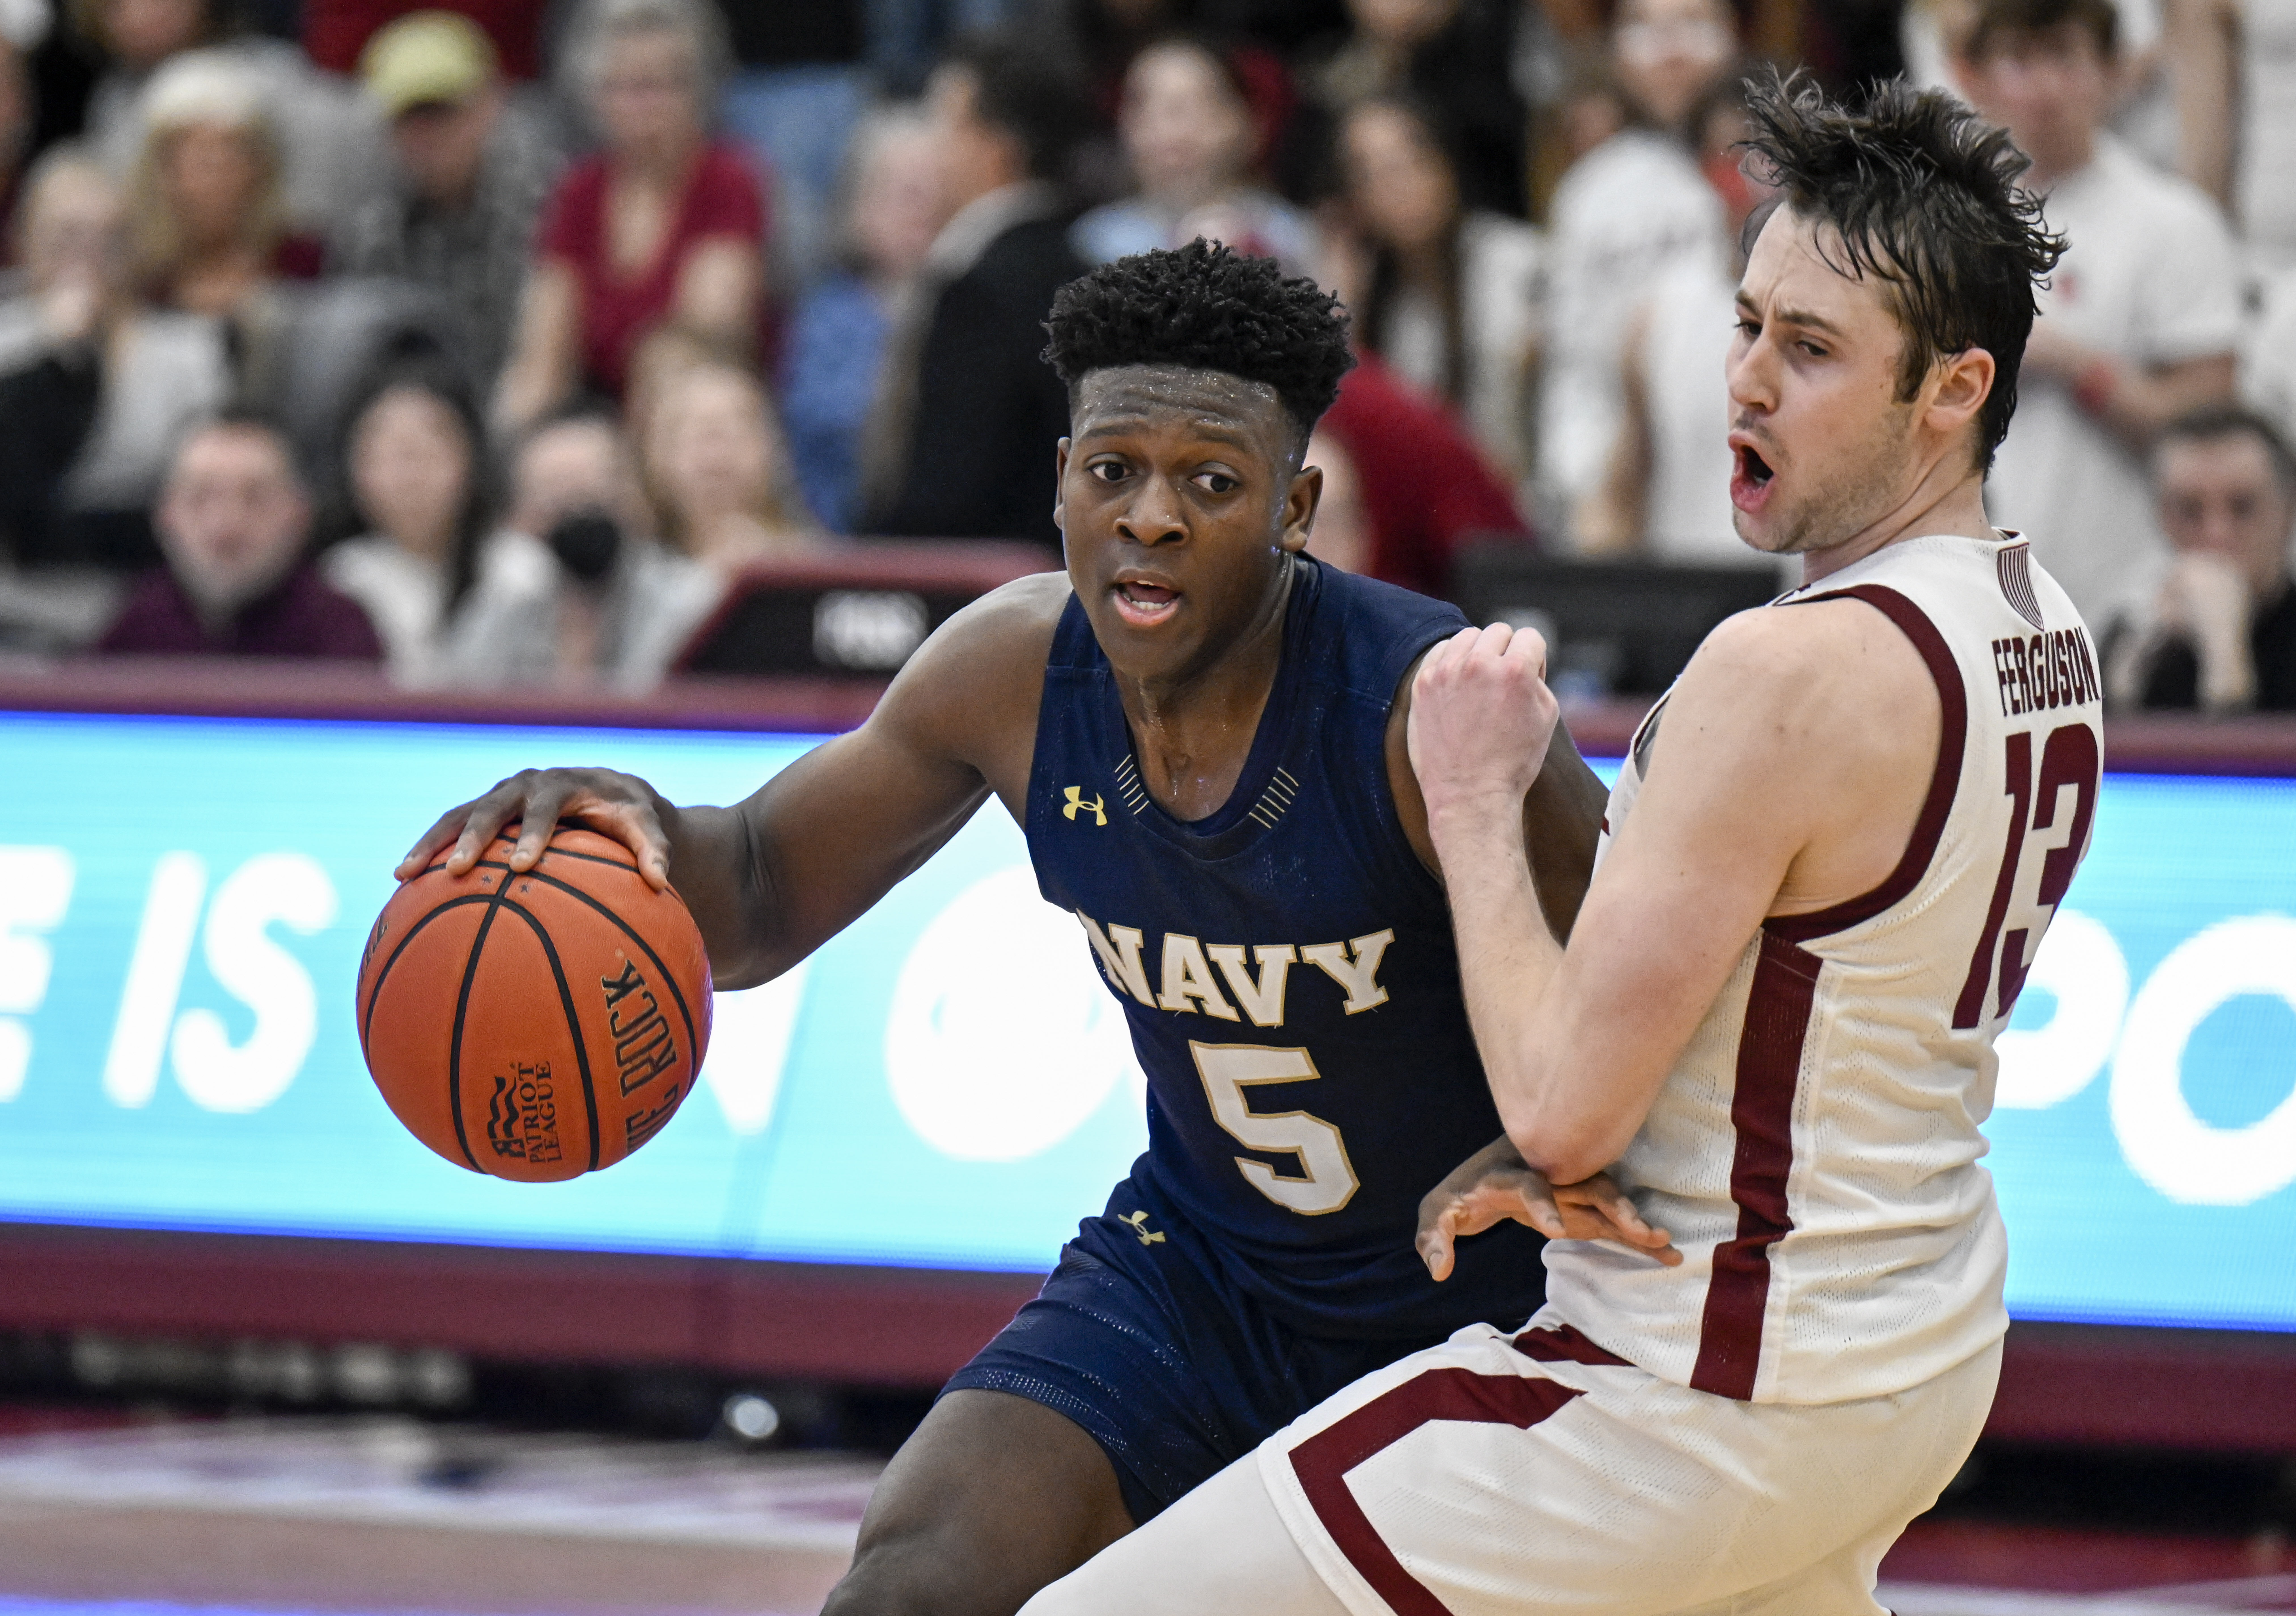 Nelson powers Navy to 74-59 victory over William & Mary